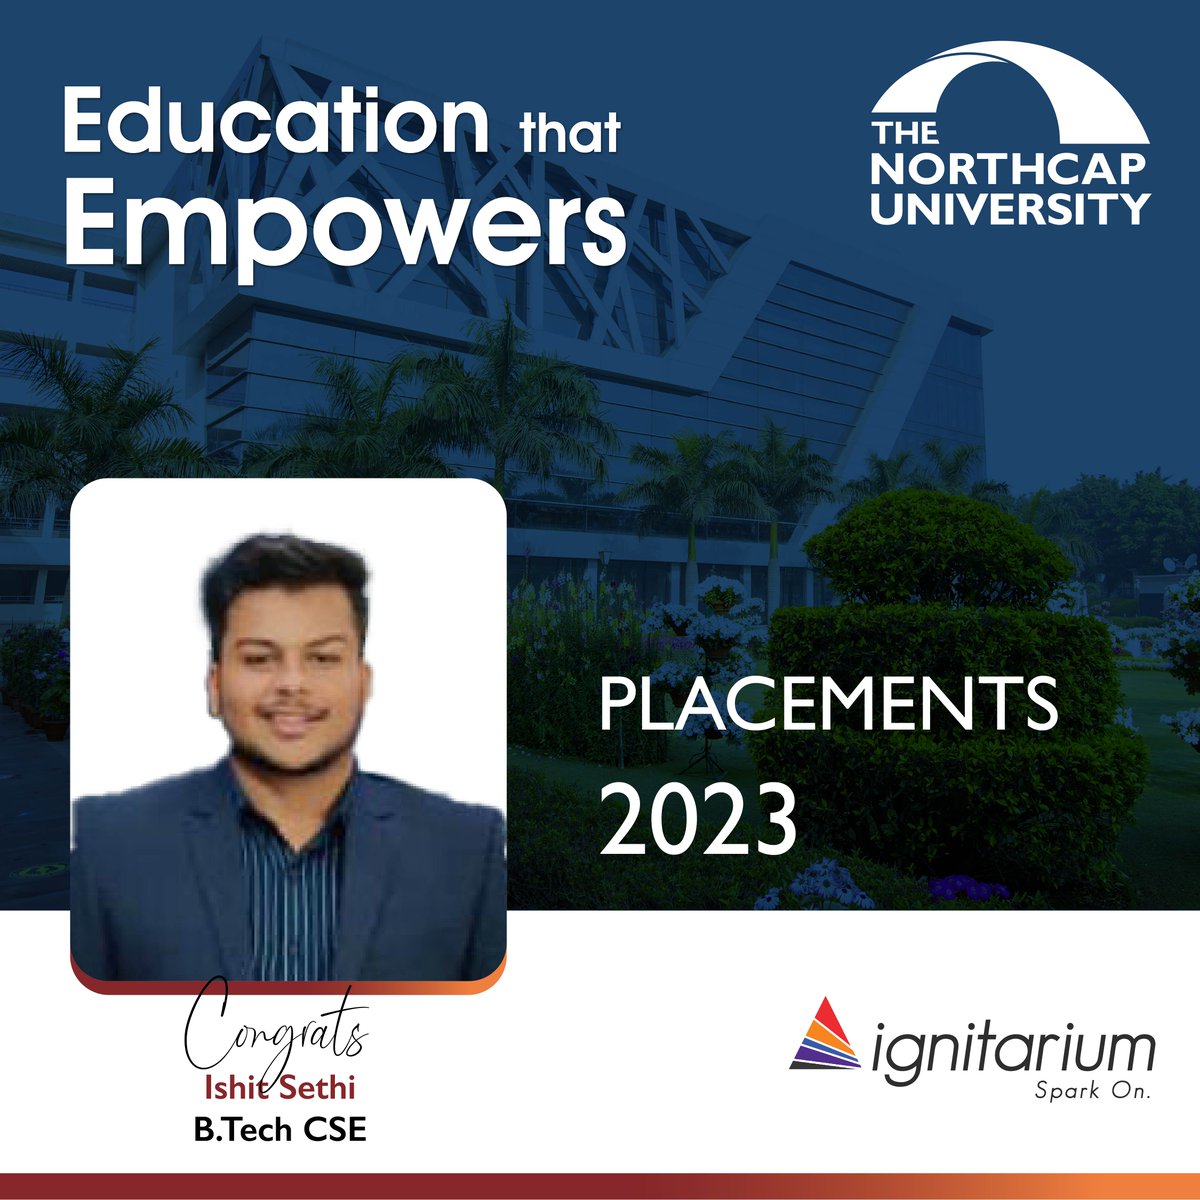 #EducationThatEmpowers We congratulate our student Ishit Sethi on getting placed with Ignitarium Congrats on this well-deserved success Ishit; may your journey at Ignitarium be filled with personal growth, and unparalleled achievements. ✨ 🎊.

#placements #NCU